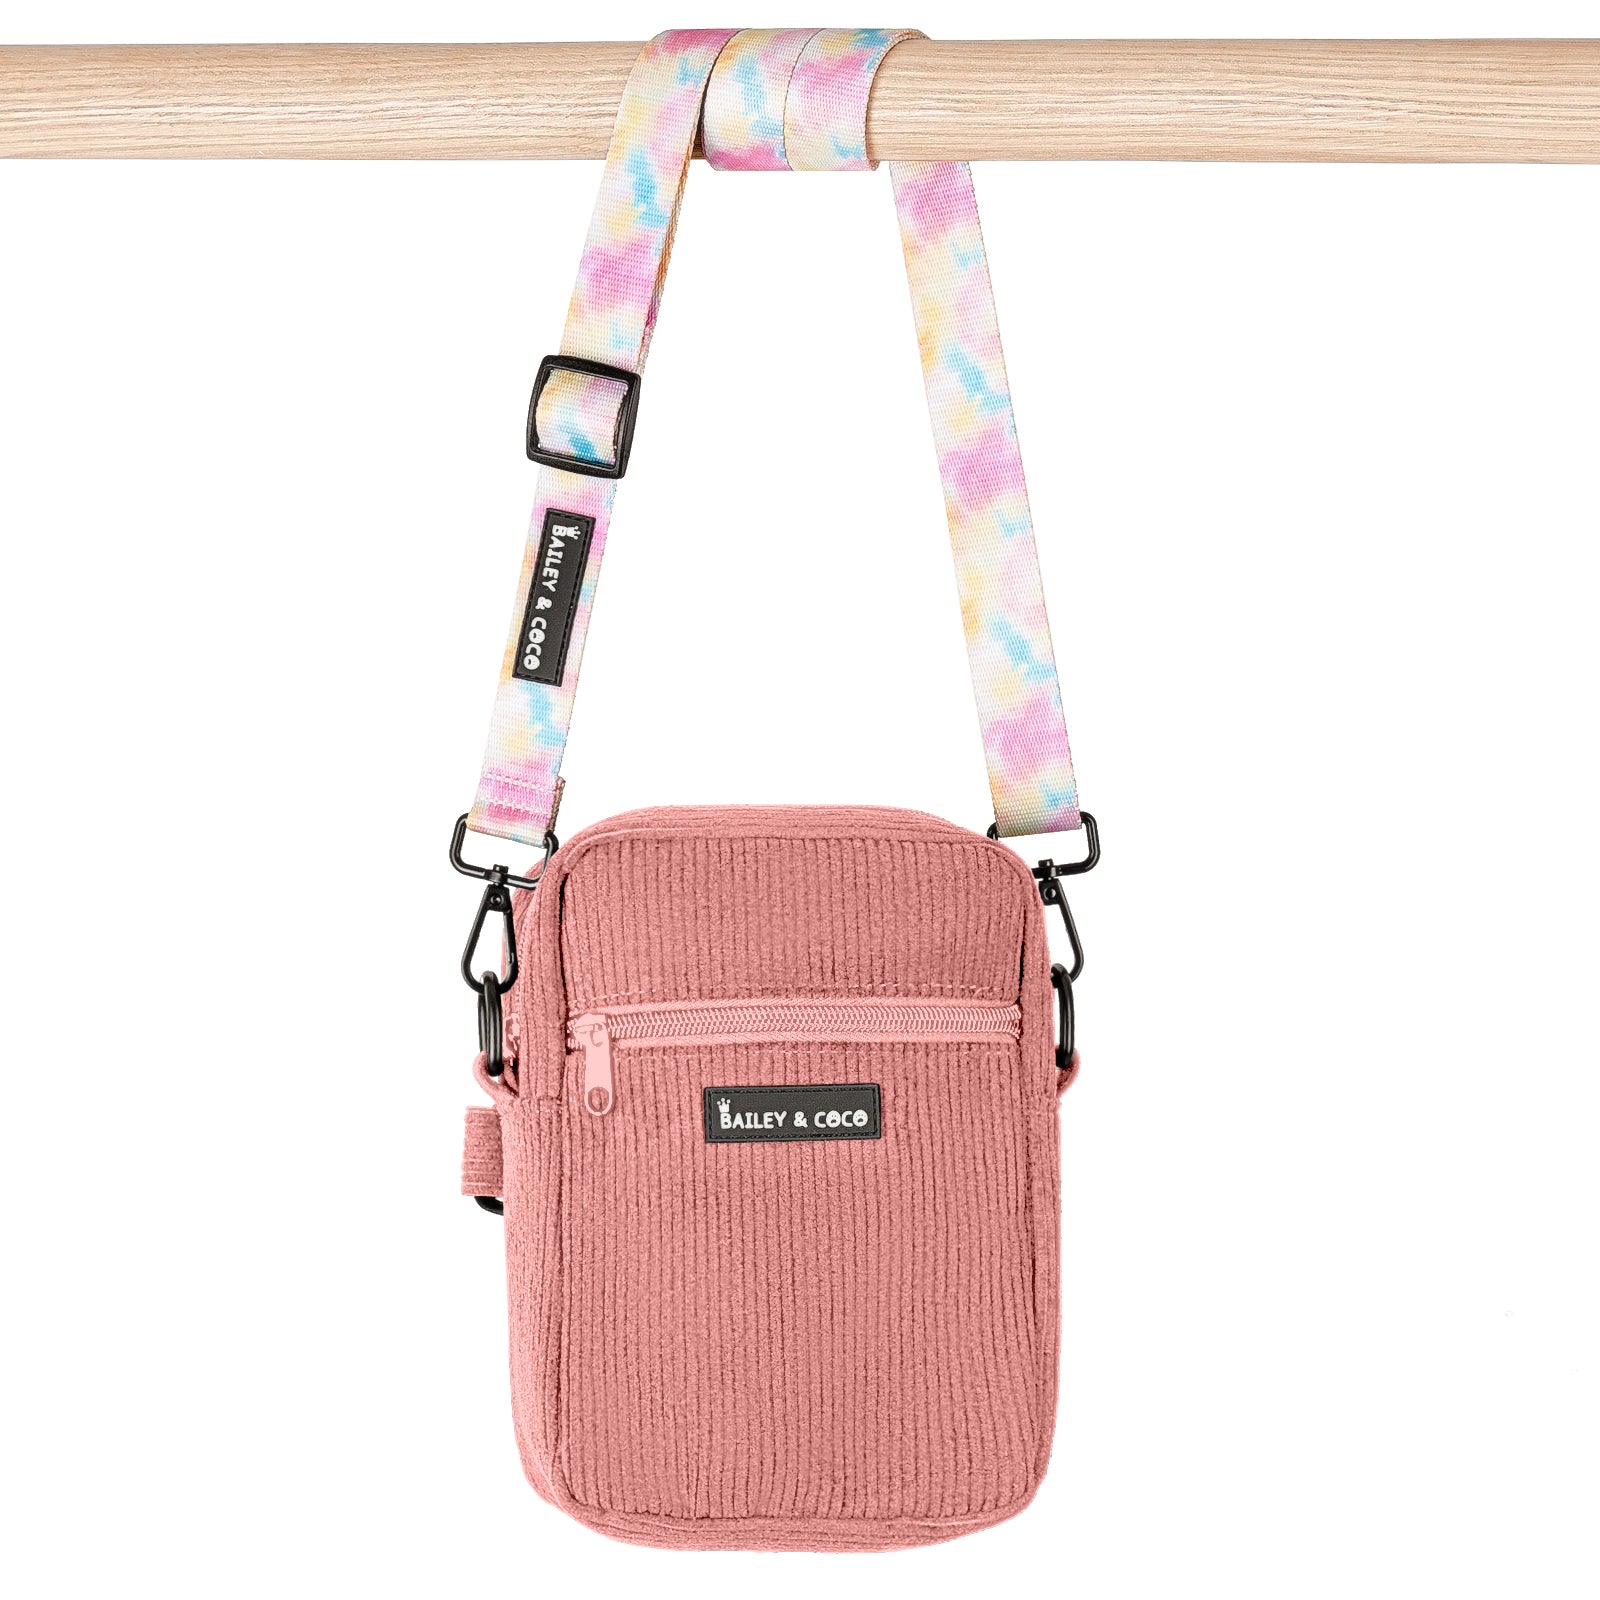 Dog Walking Bag With Candy Floss Strap - Lilac